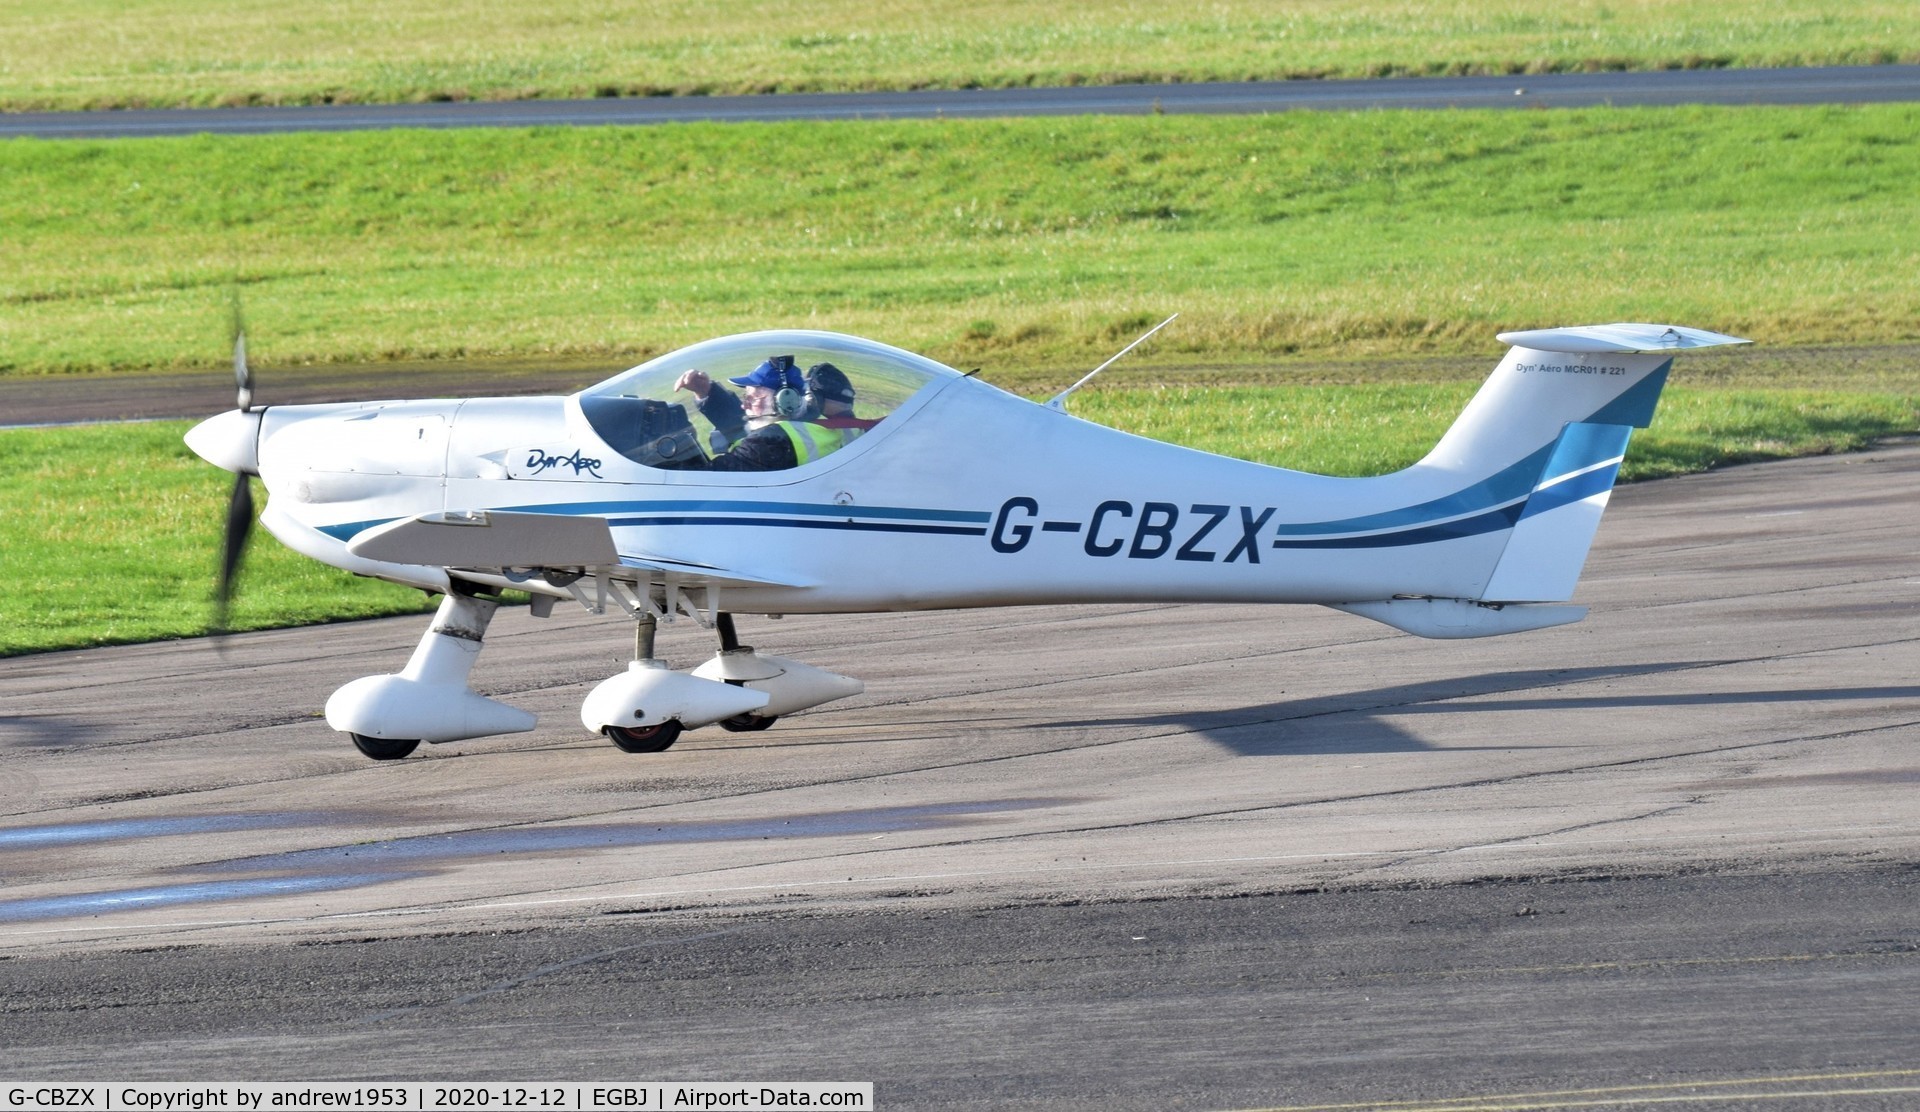 G-CBZX, 2005 Dyn'Aero MCR-01 ULC Banbi C/N PFA 301B-13957, G-CBZX at Gloucestershire Airport.